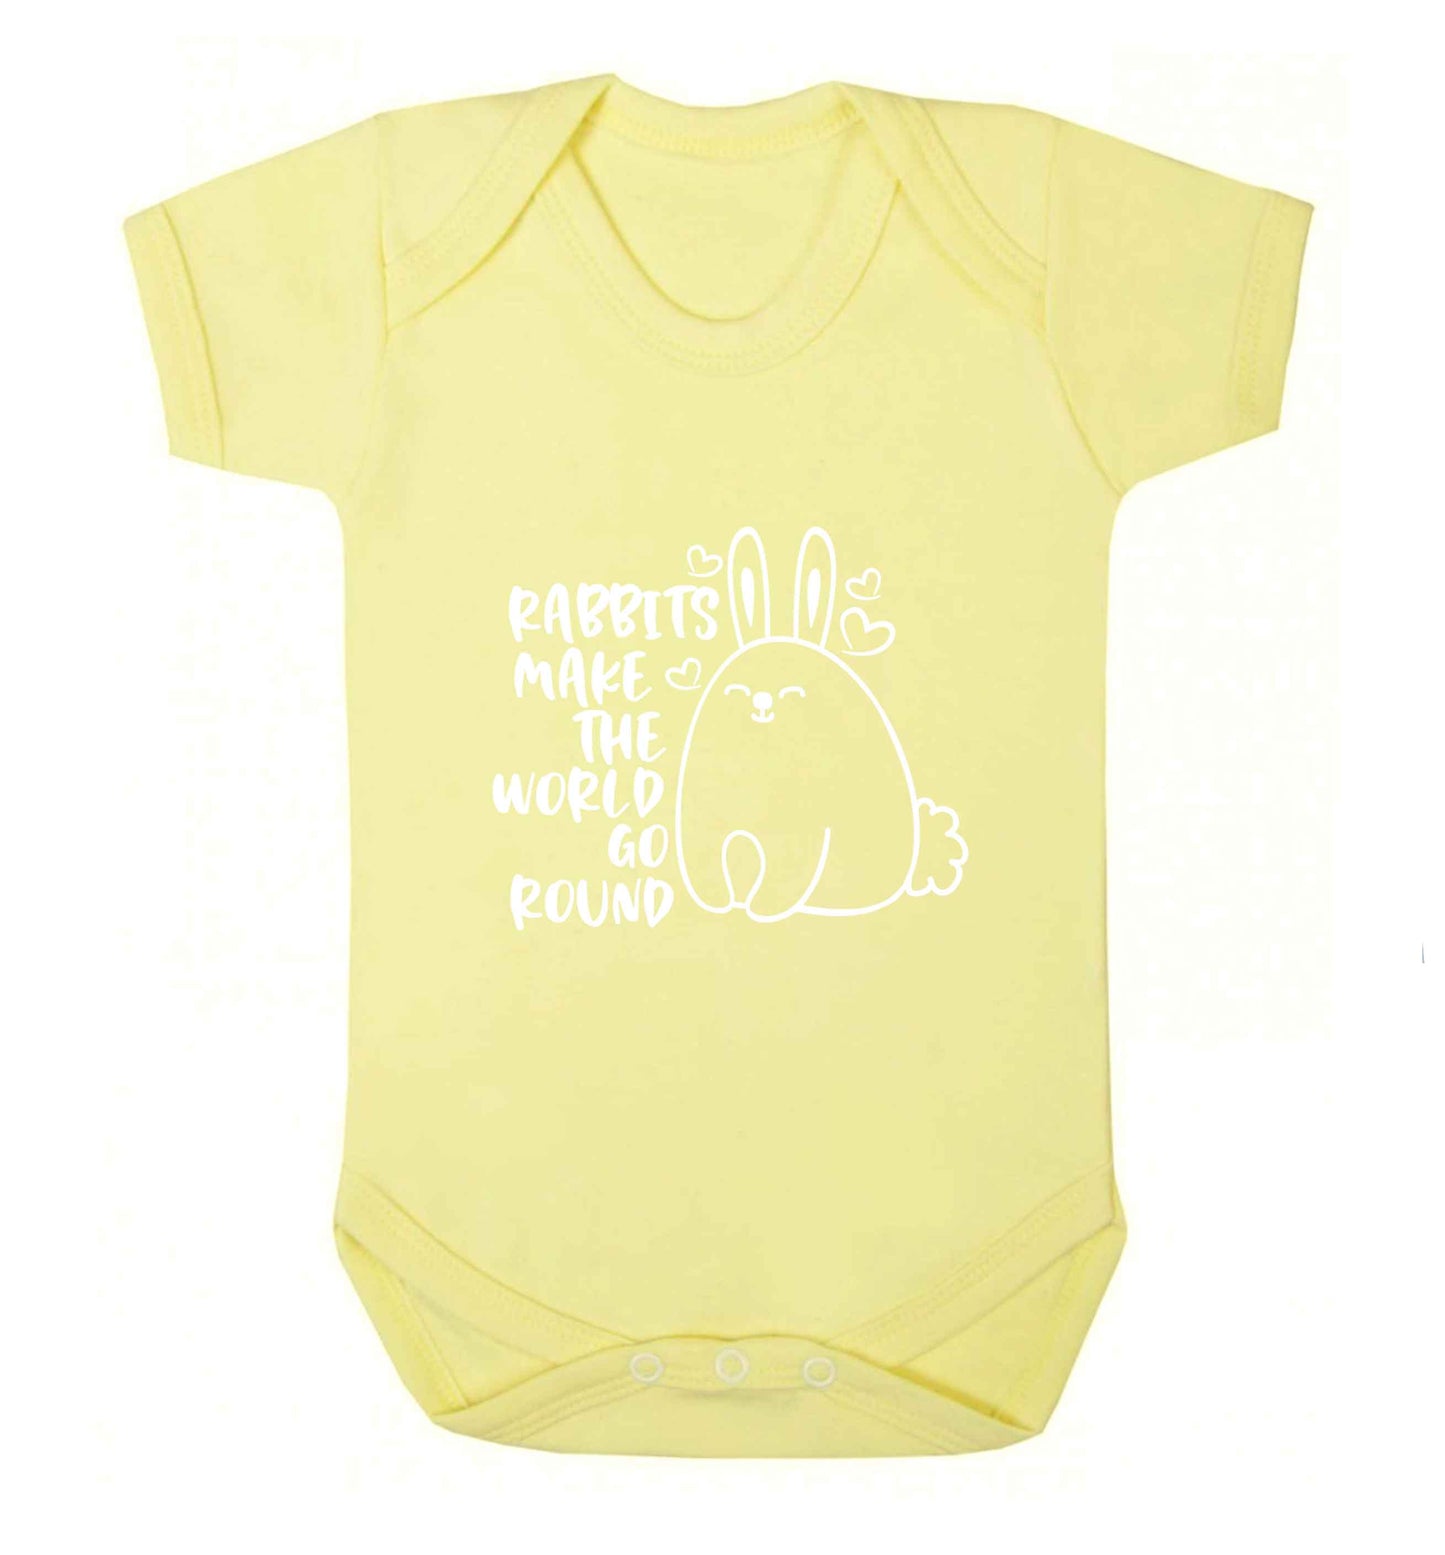 Rabbits make the world go round baby vest pale yellow 18-24 months